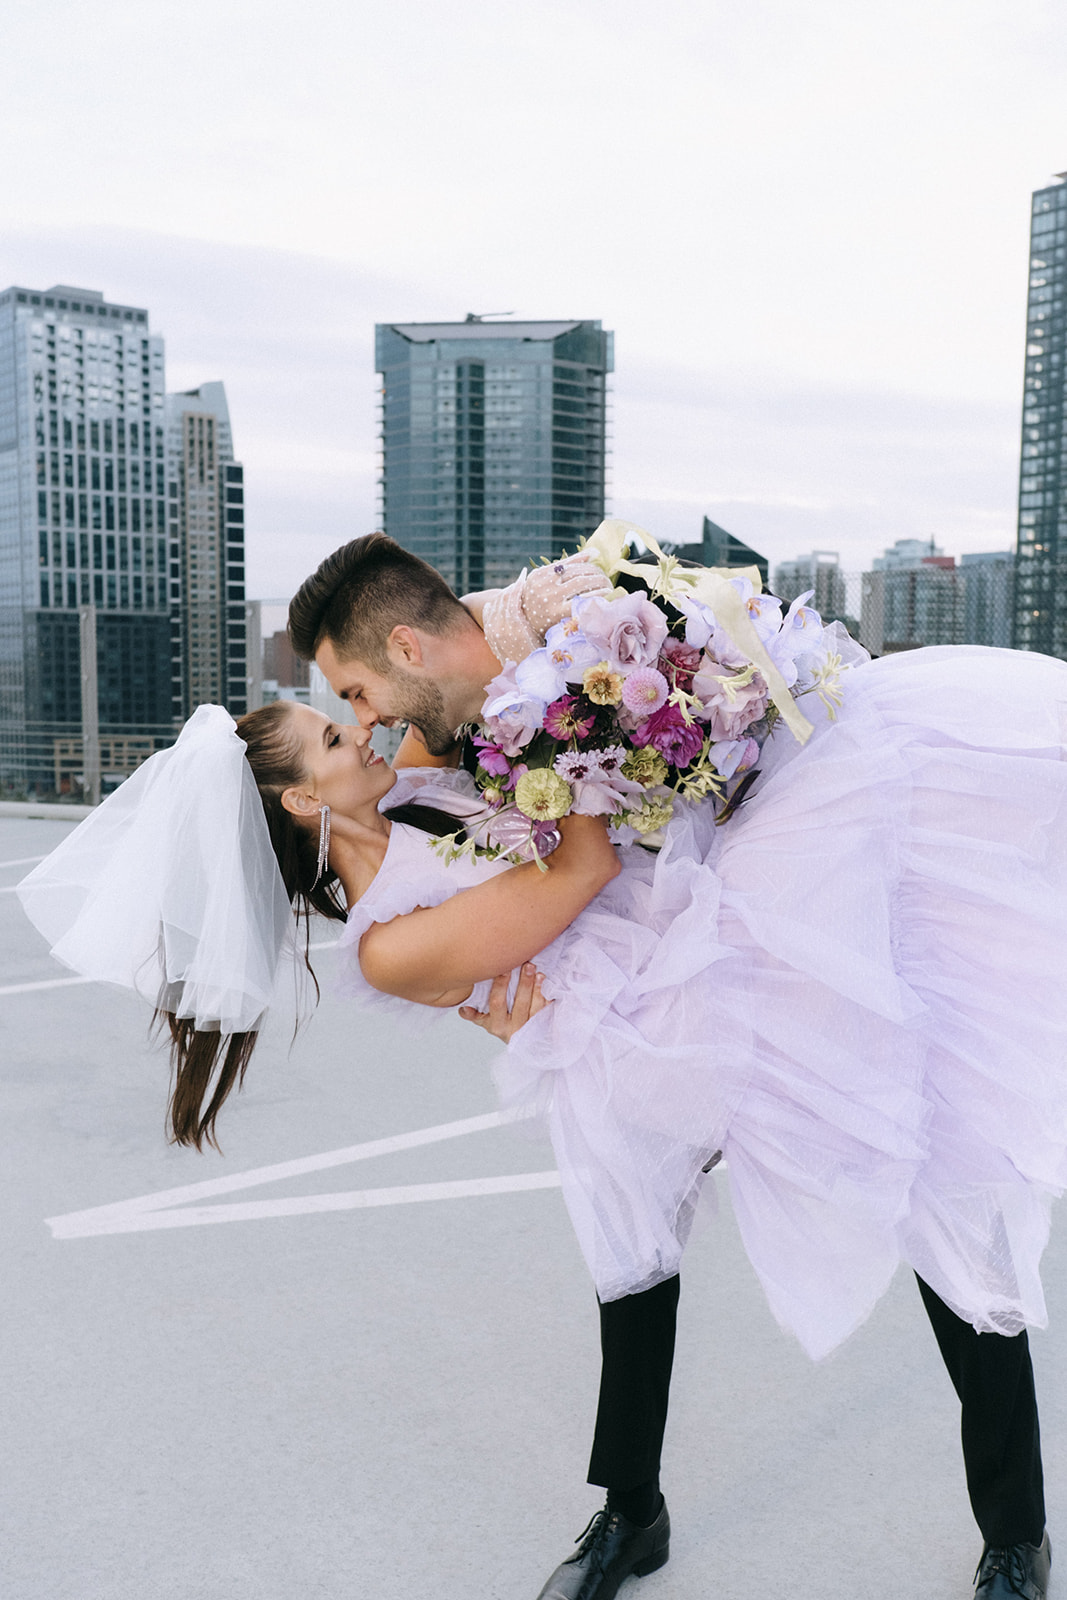 retro wedding with tulle lavender gown, parking lot elopement, downtown wedding